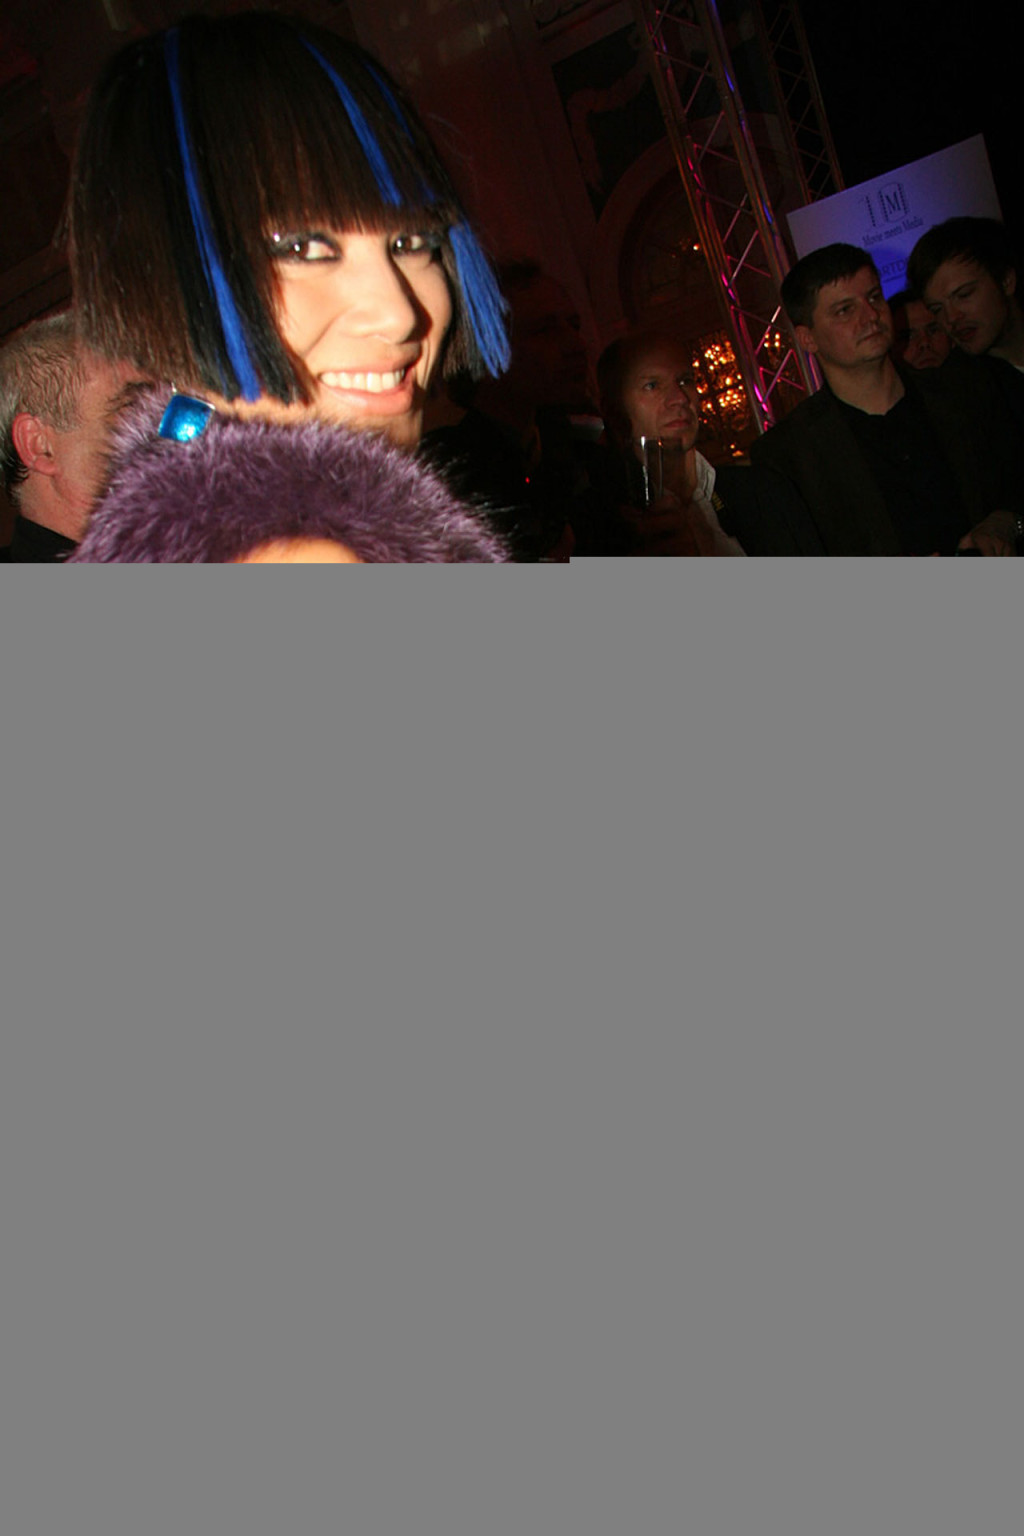 Bai Ling has a nipple slip while she is performing her show #75369637